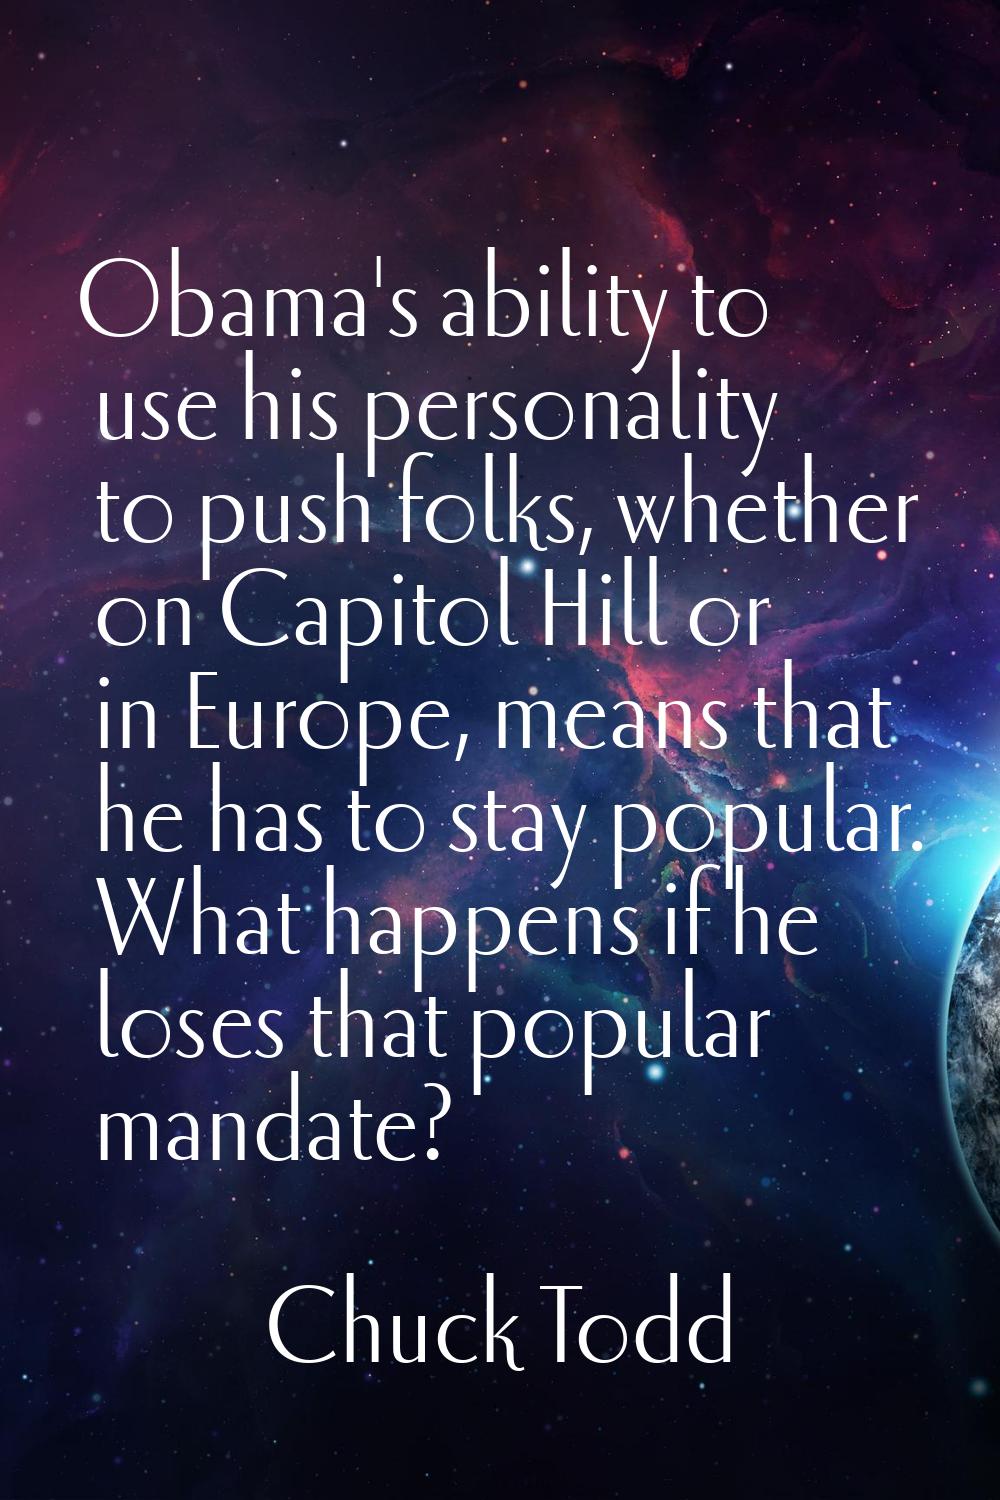 Obama's ability to use his personality to push folks, whether on Capitol Hill or in Europe, means t